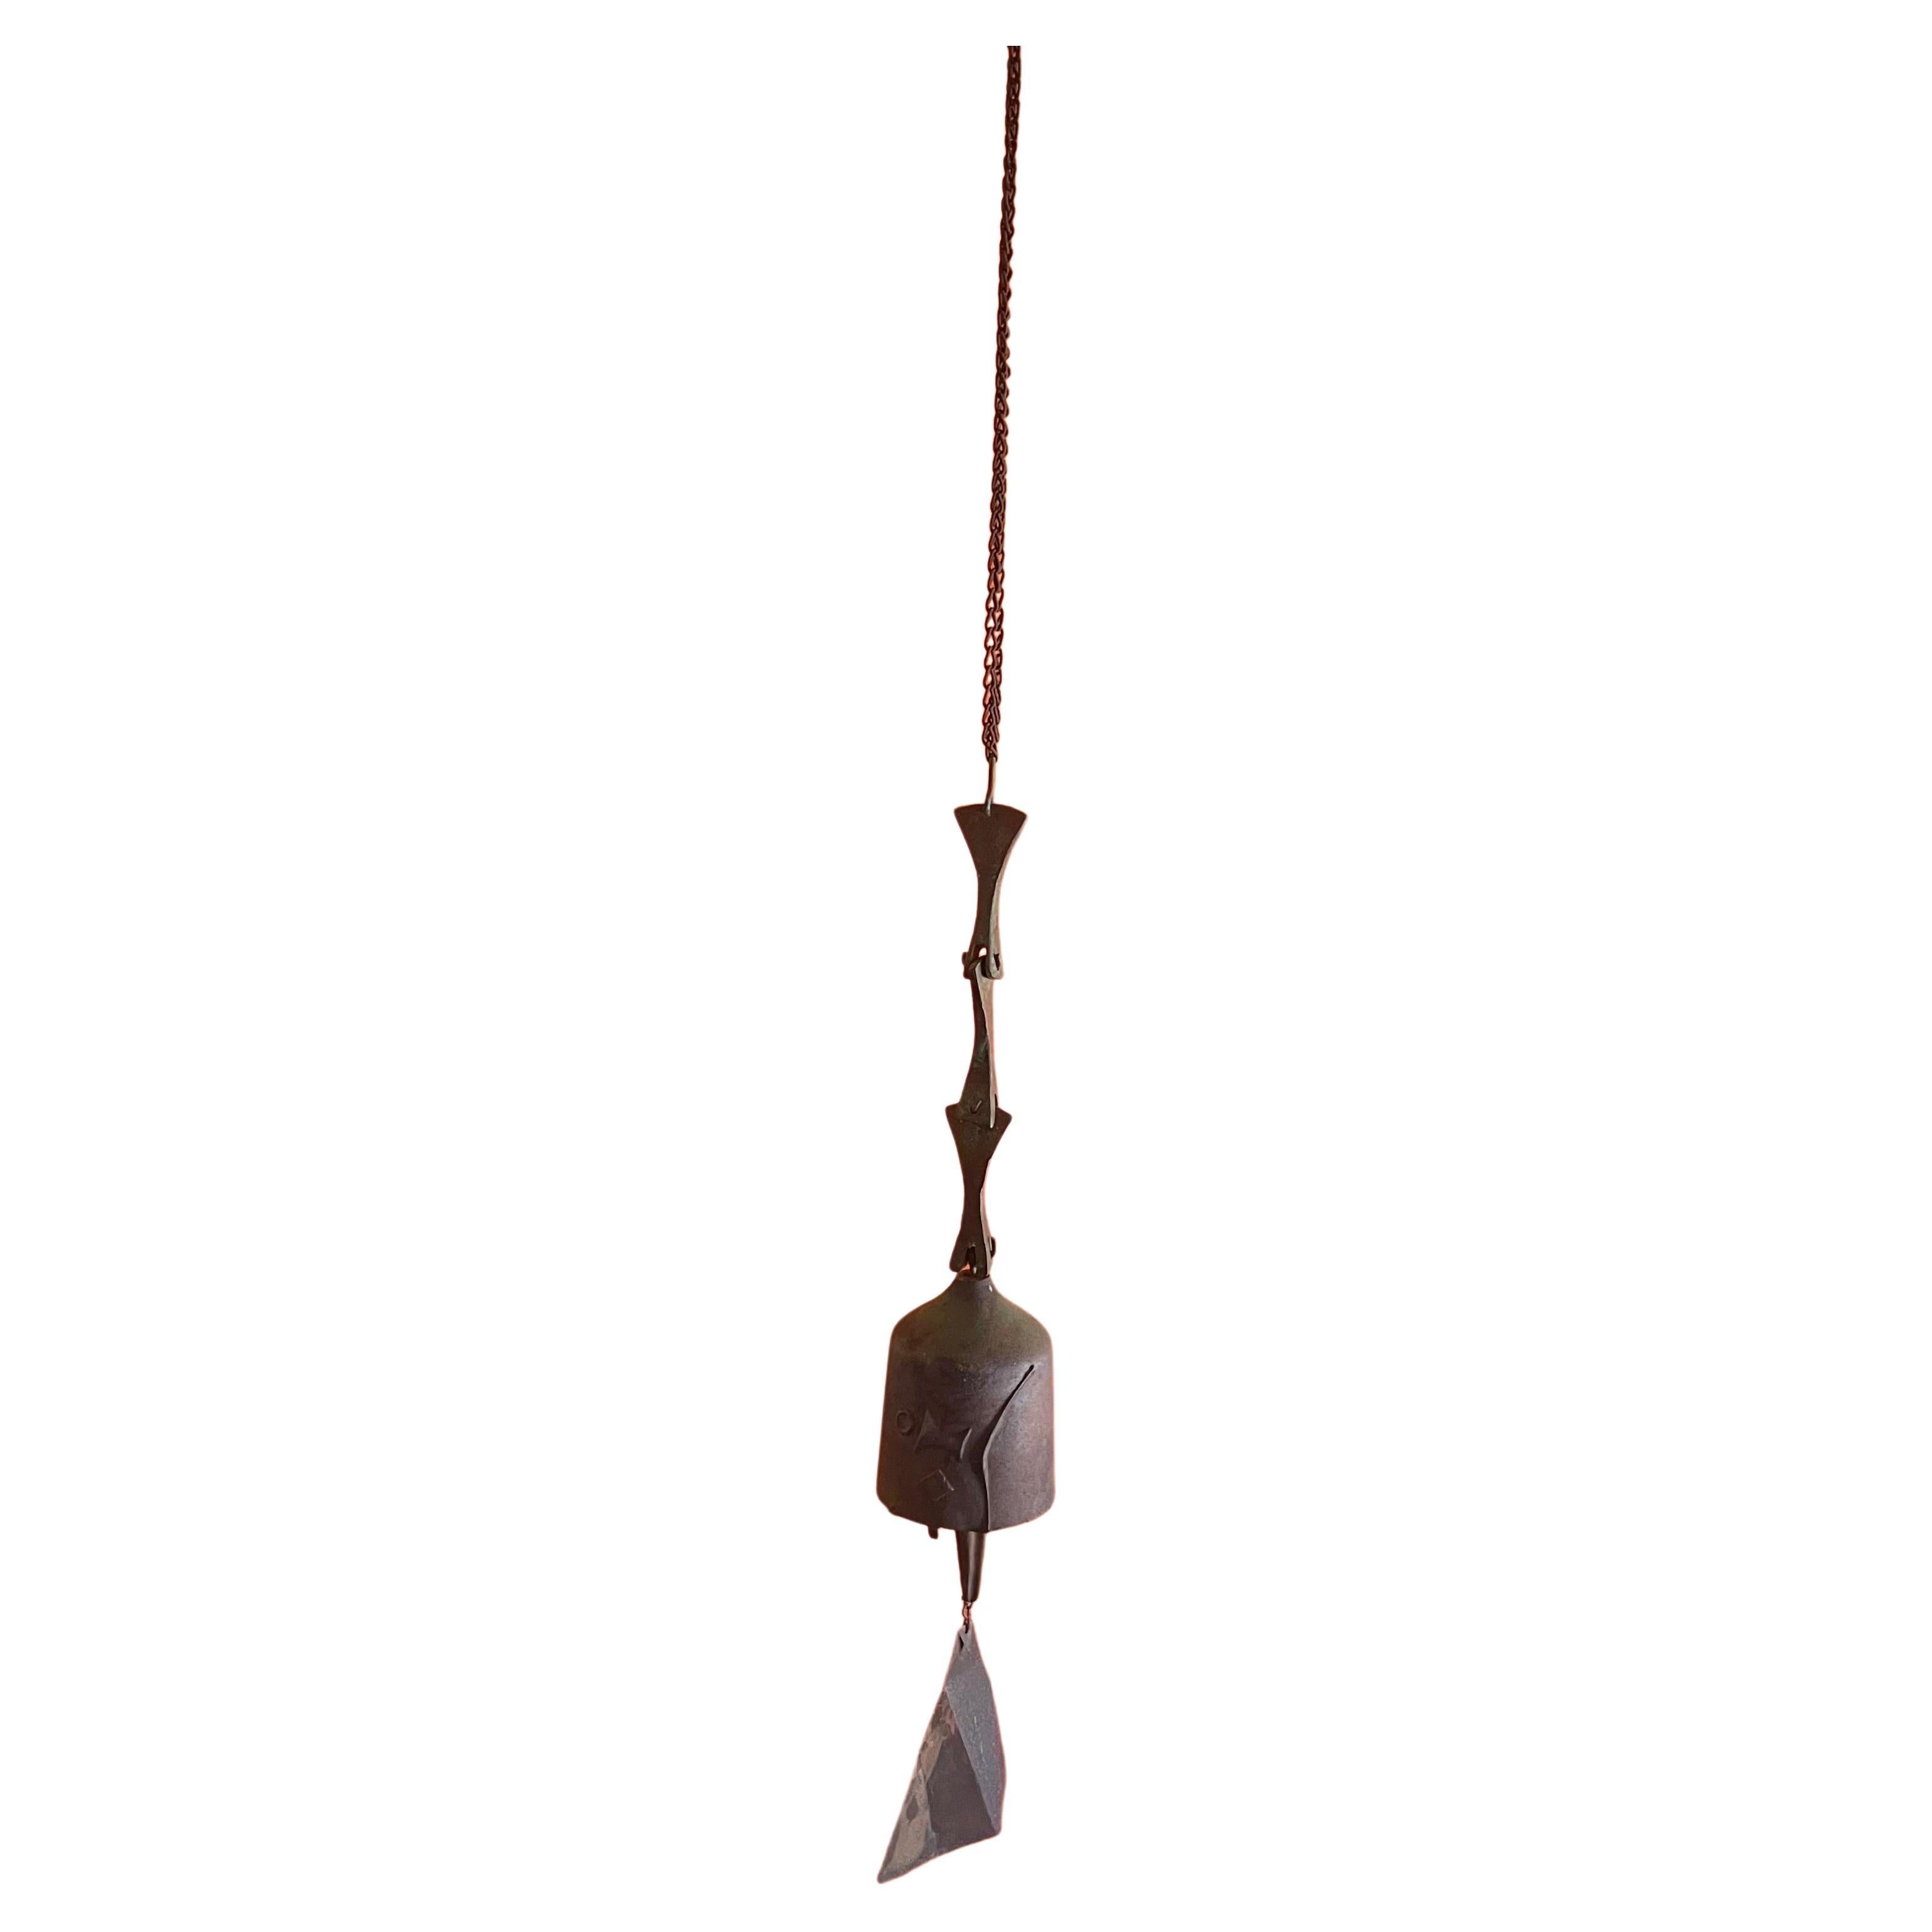 American Bronze Wind Chime / Bell by Paolo Soleri for Cosanti